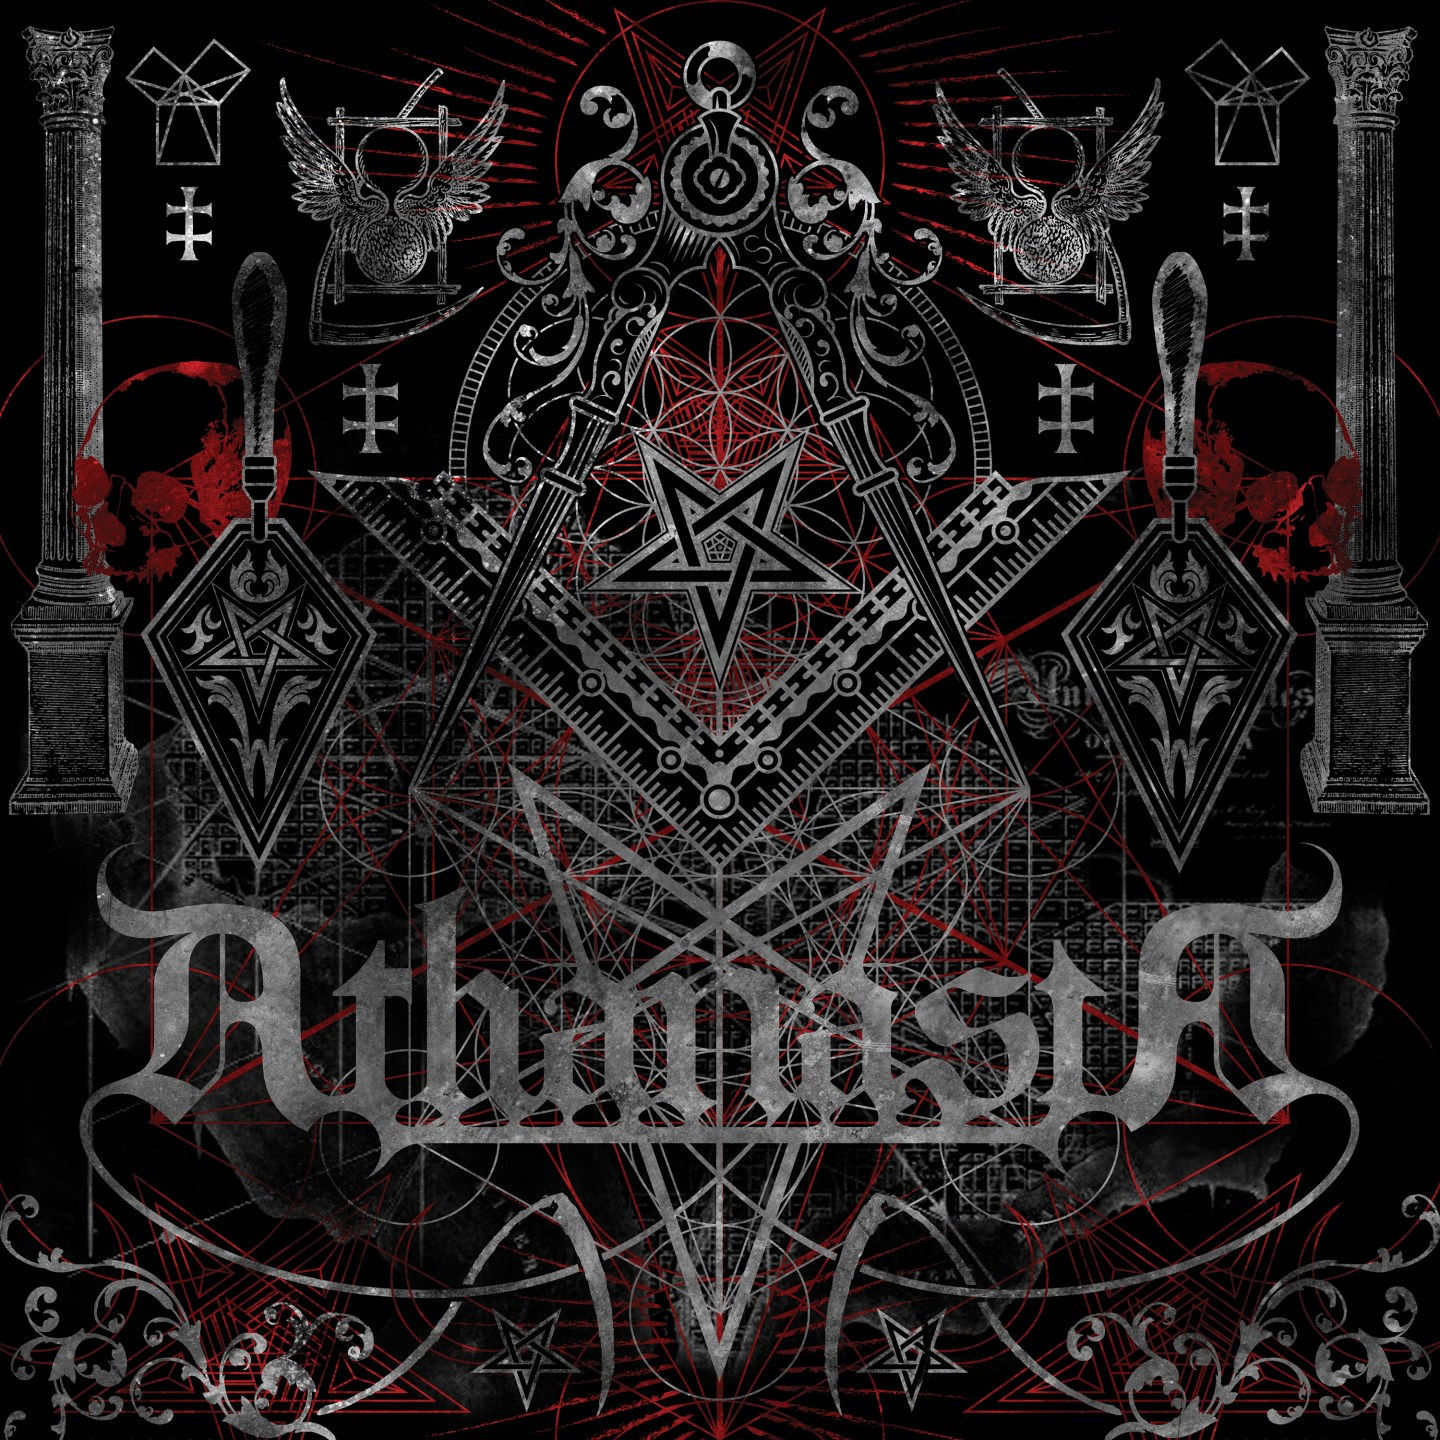 Athanasia - The Order of the Silver Compass (2019)